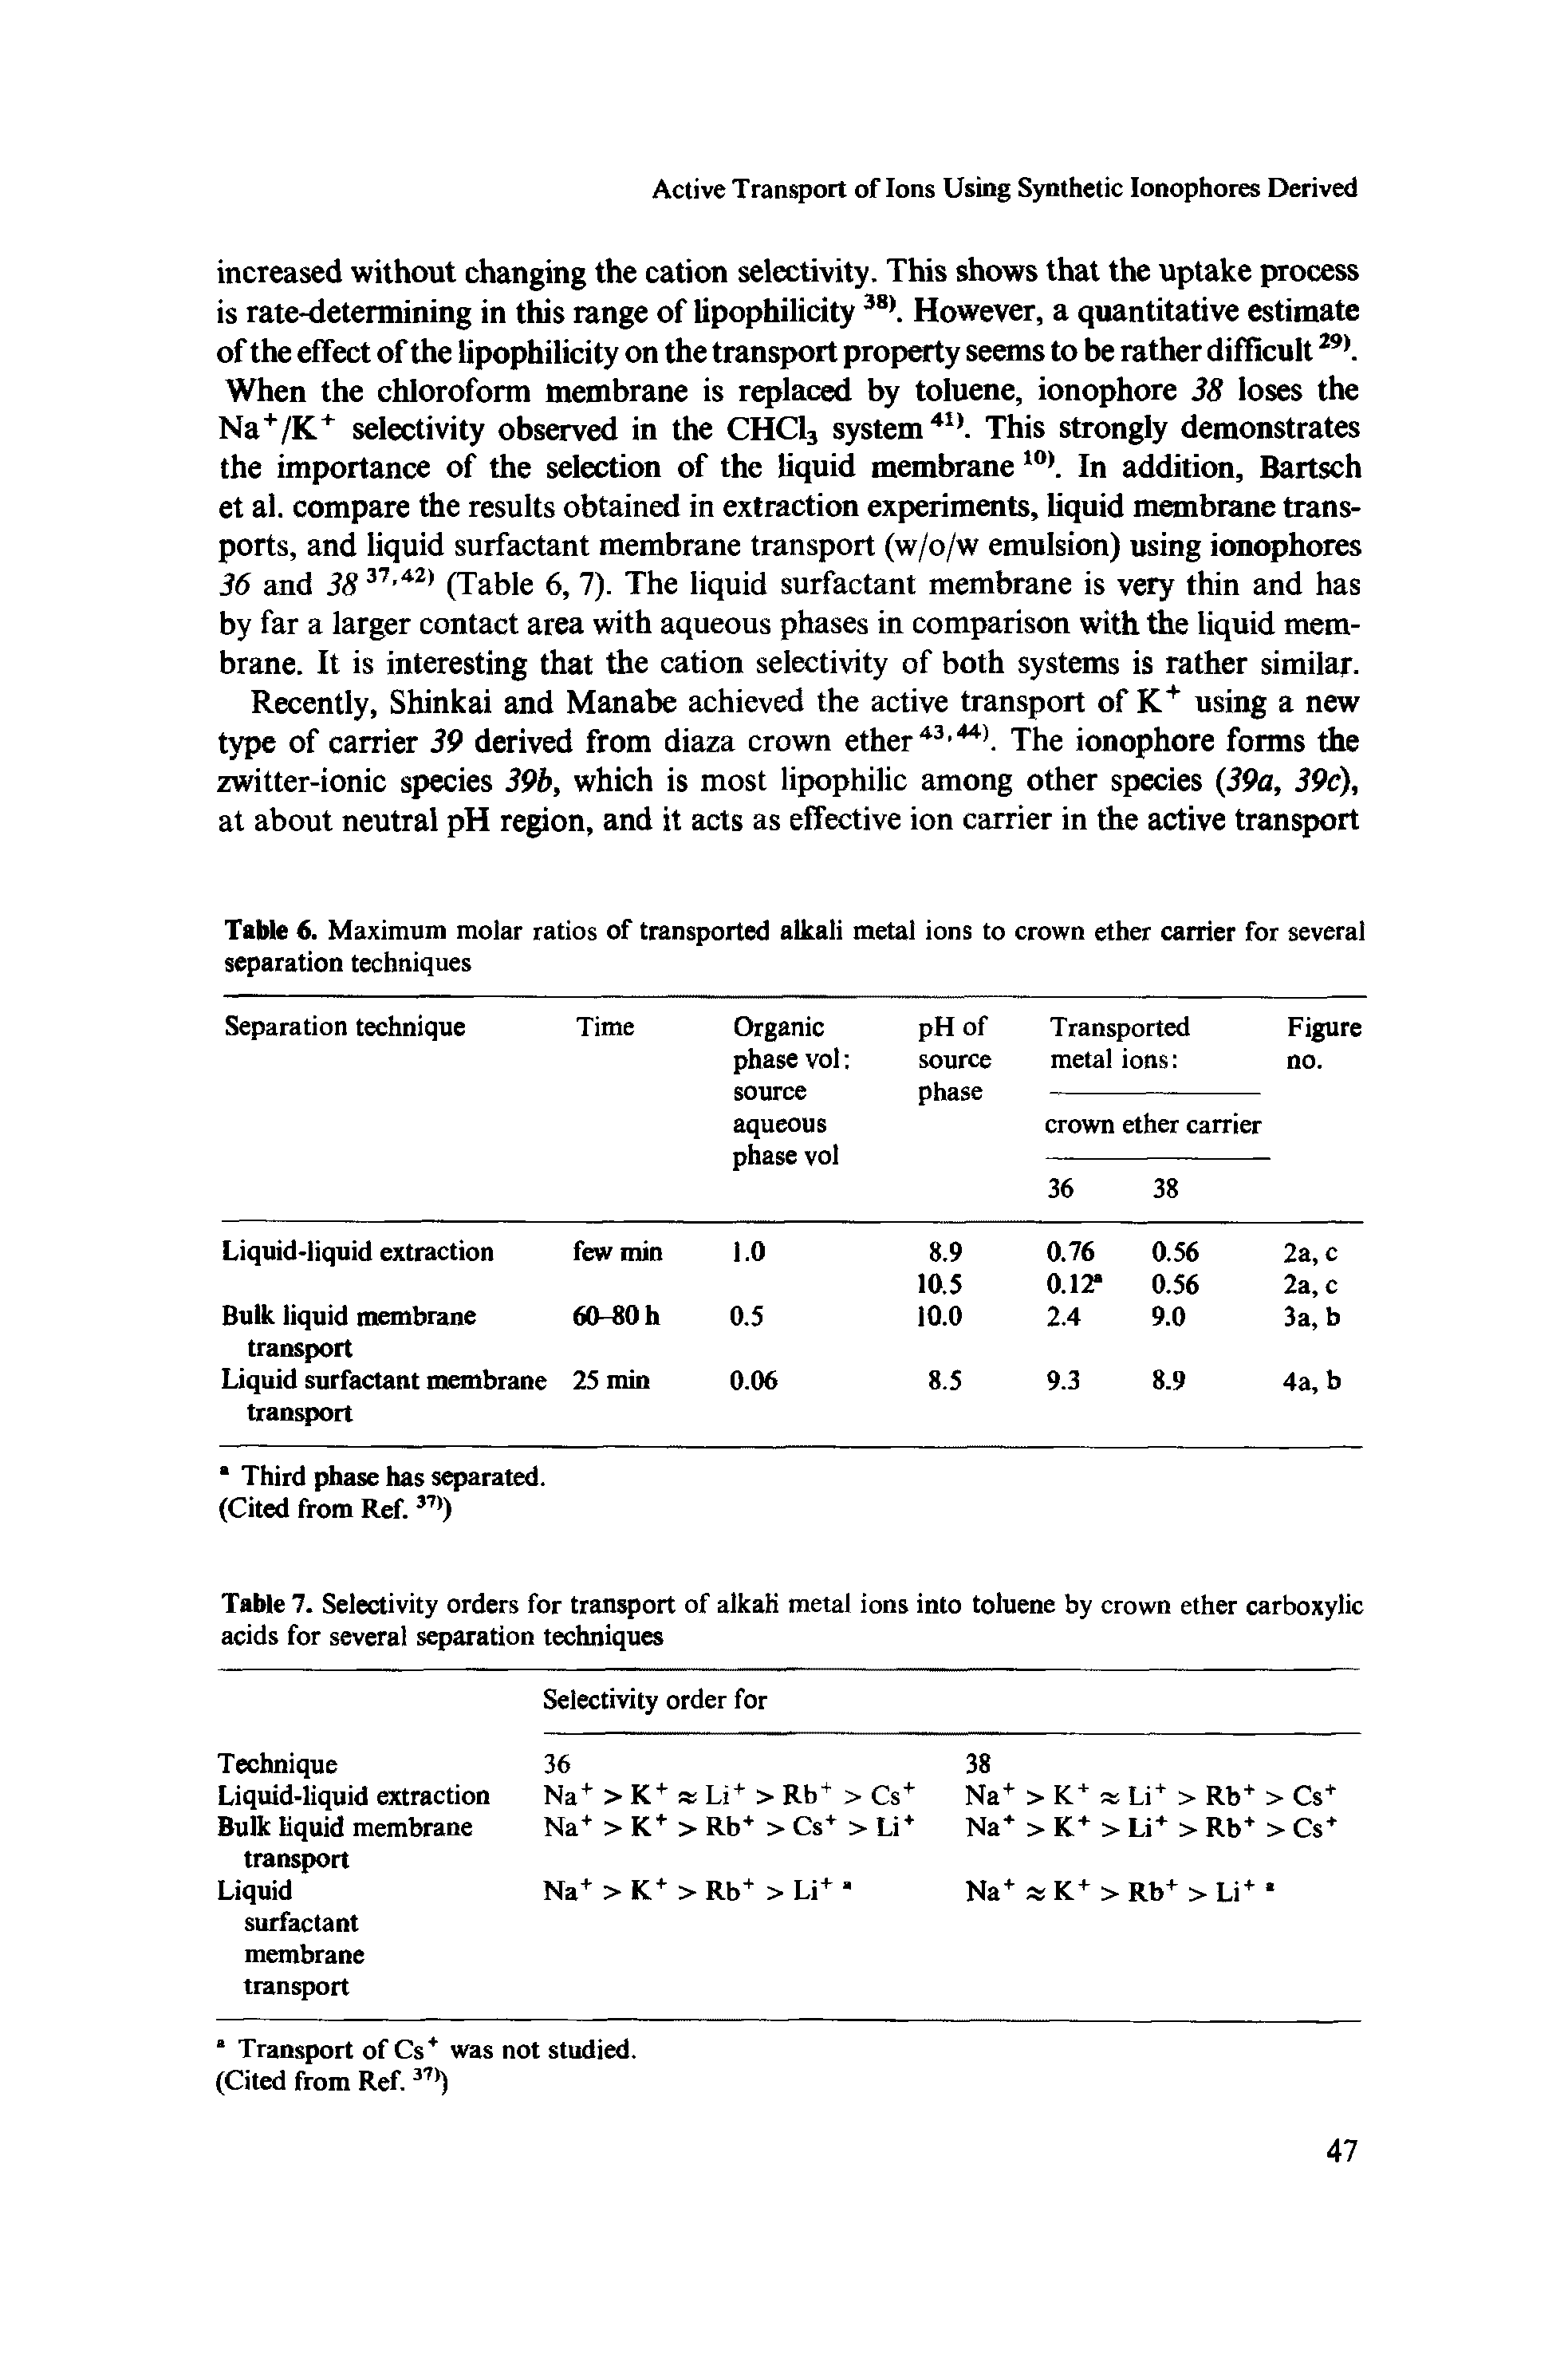 Table 6. Maximum molar ratios of transported alkali metal ions to crown ether carrier for several separation techniques...